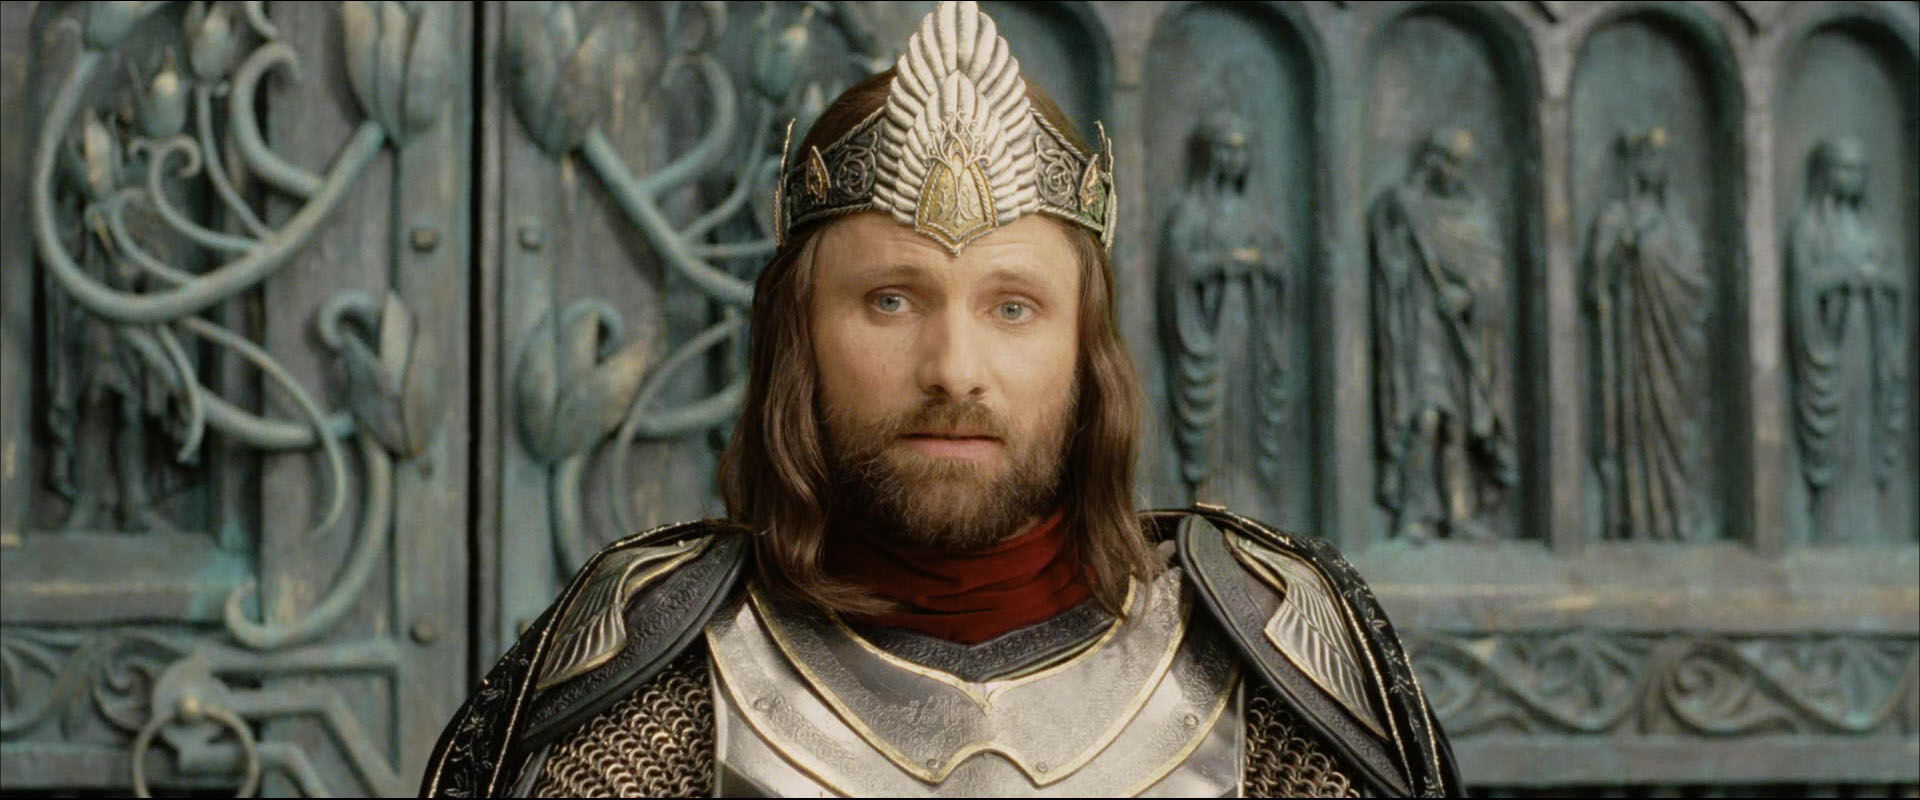 Minas Arnor - When Elendil and his people arrived in Middle Earth, his two  sons established the kingdom of Gondor wh…